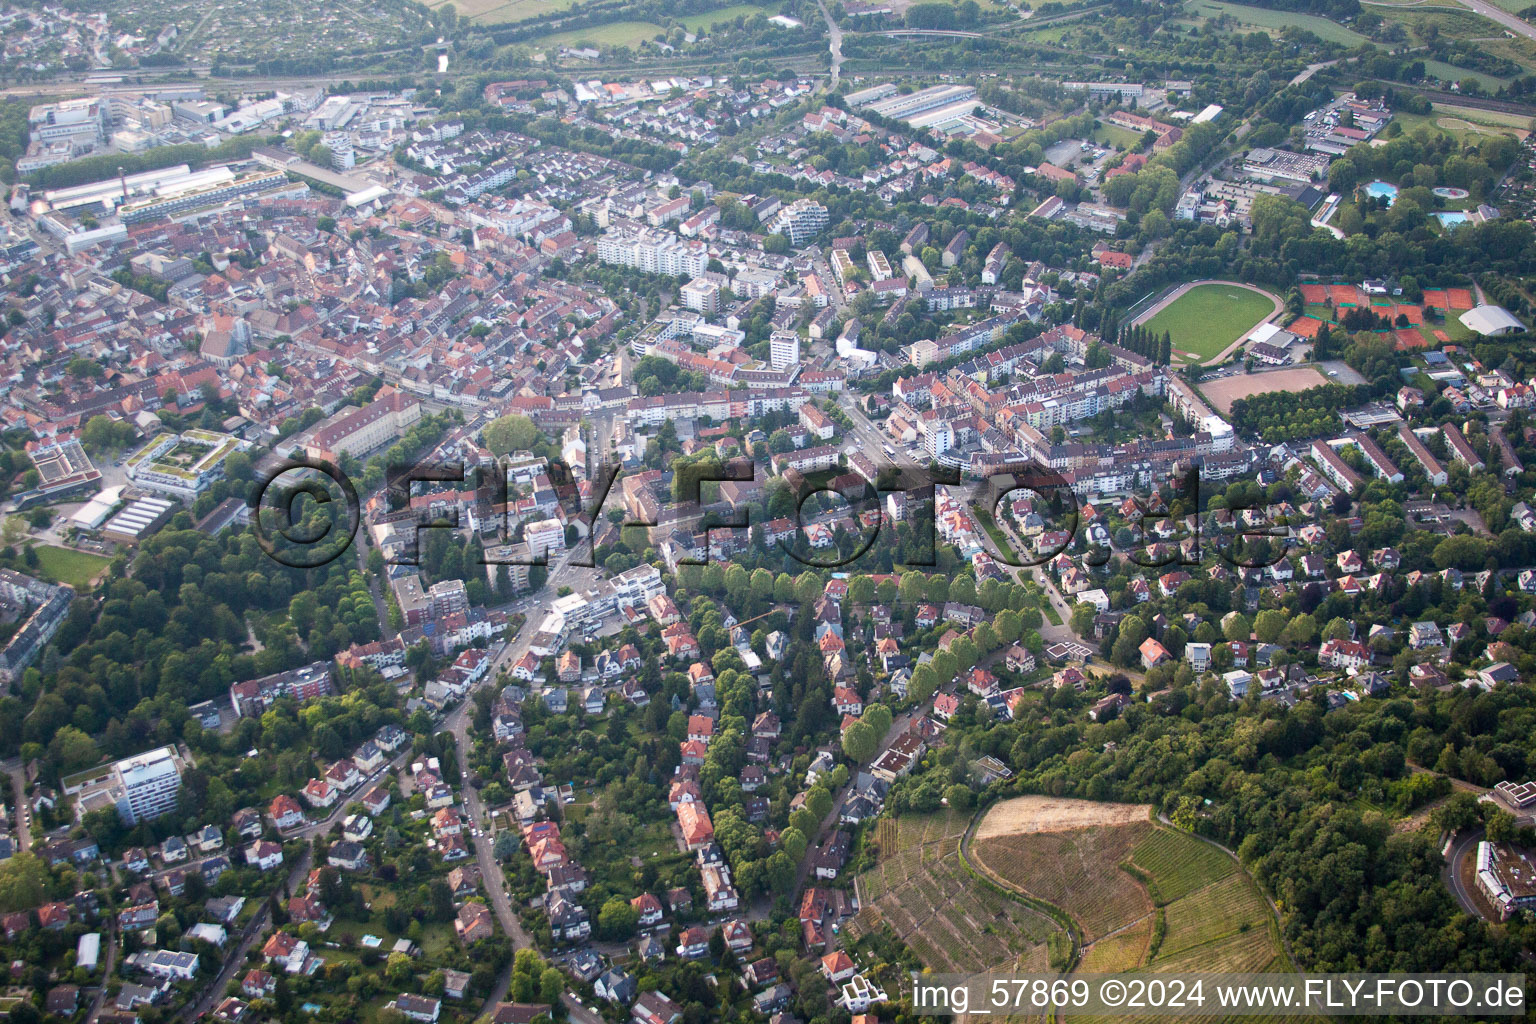 Aerial view of Geigersberg in the district Durlach in Karlsruhe in the state Baden-Wuerttemberg, Germany